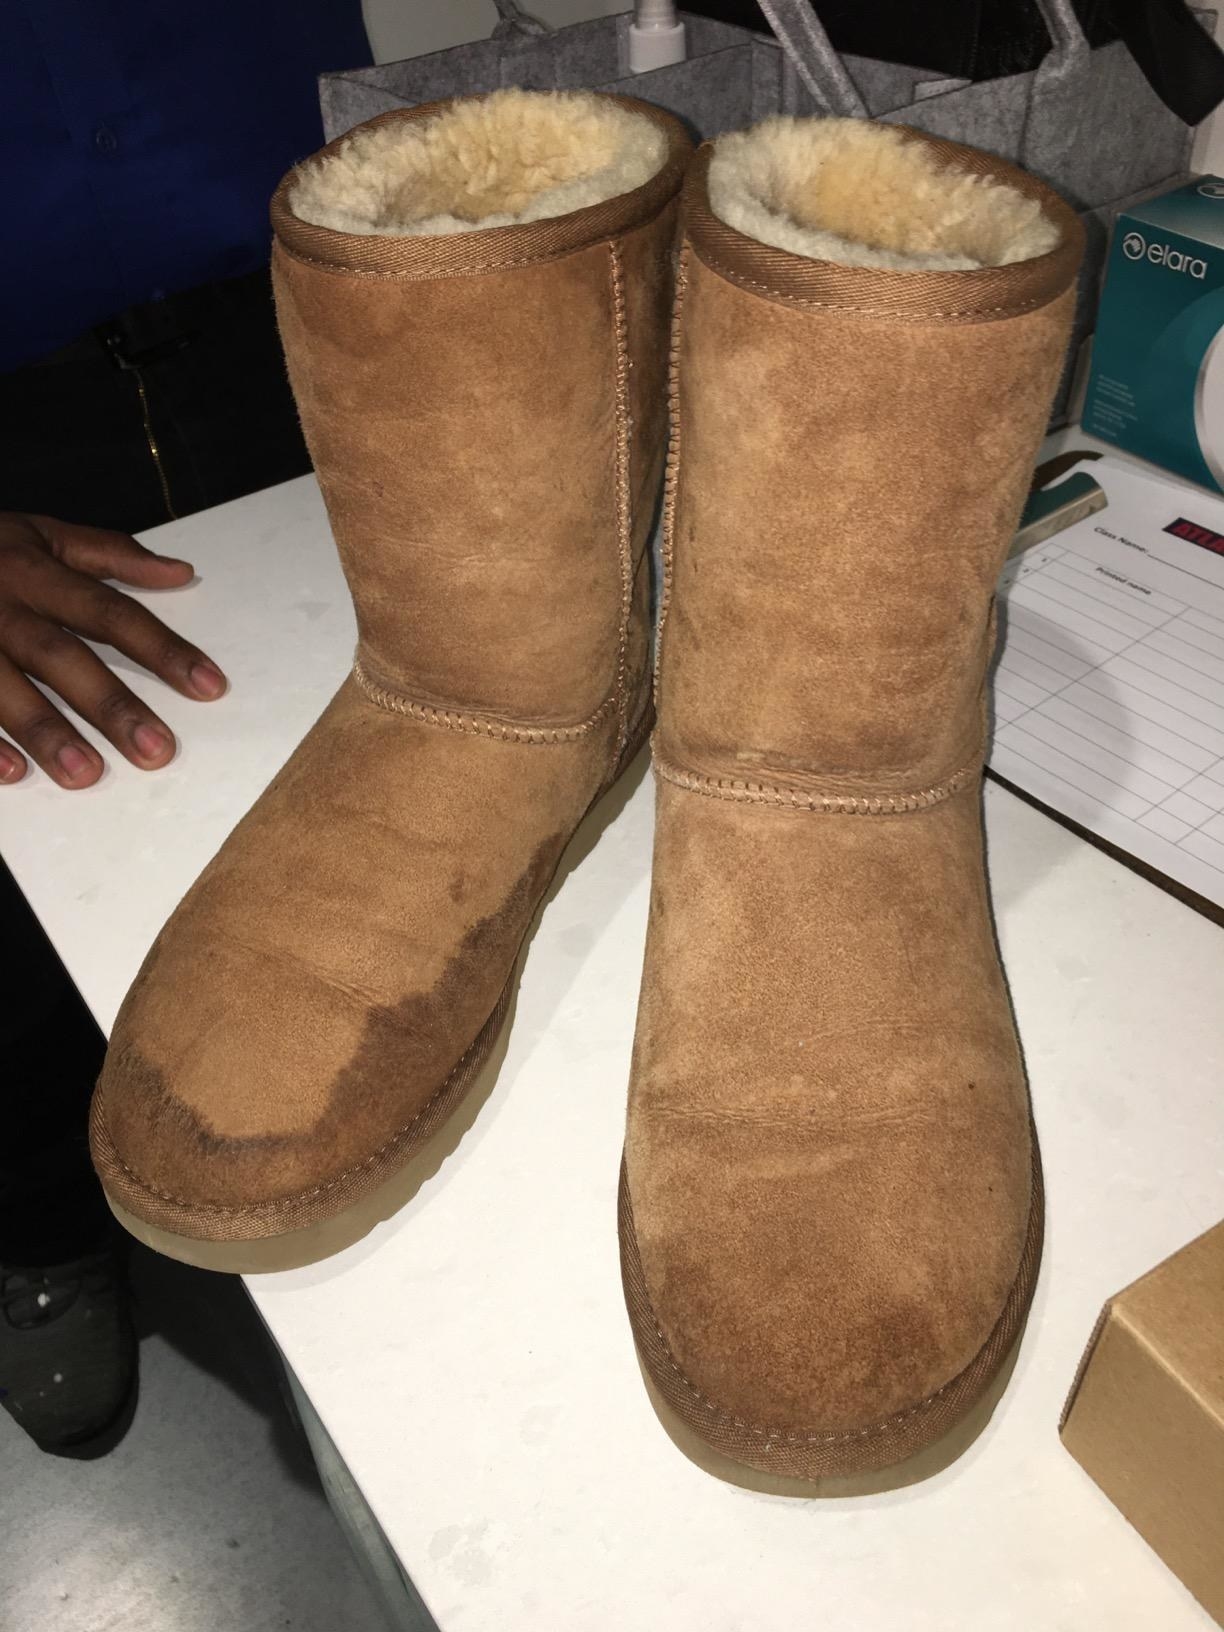 water damage on uggs